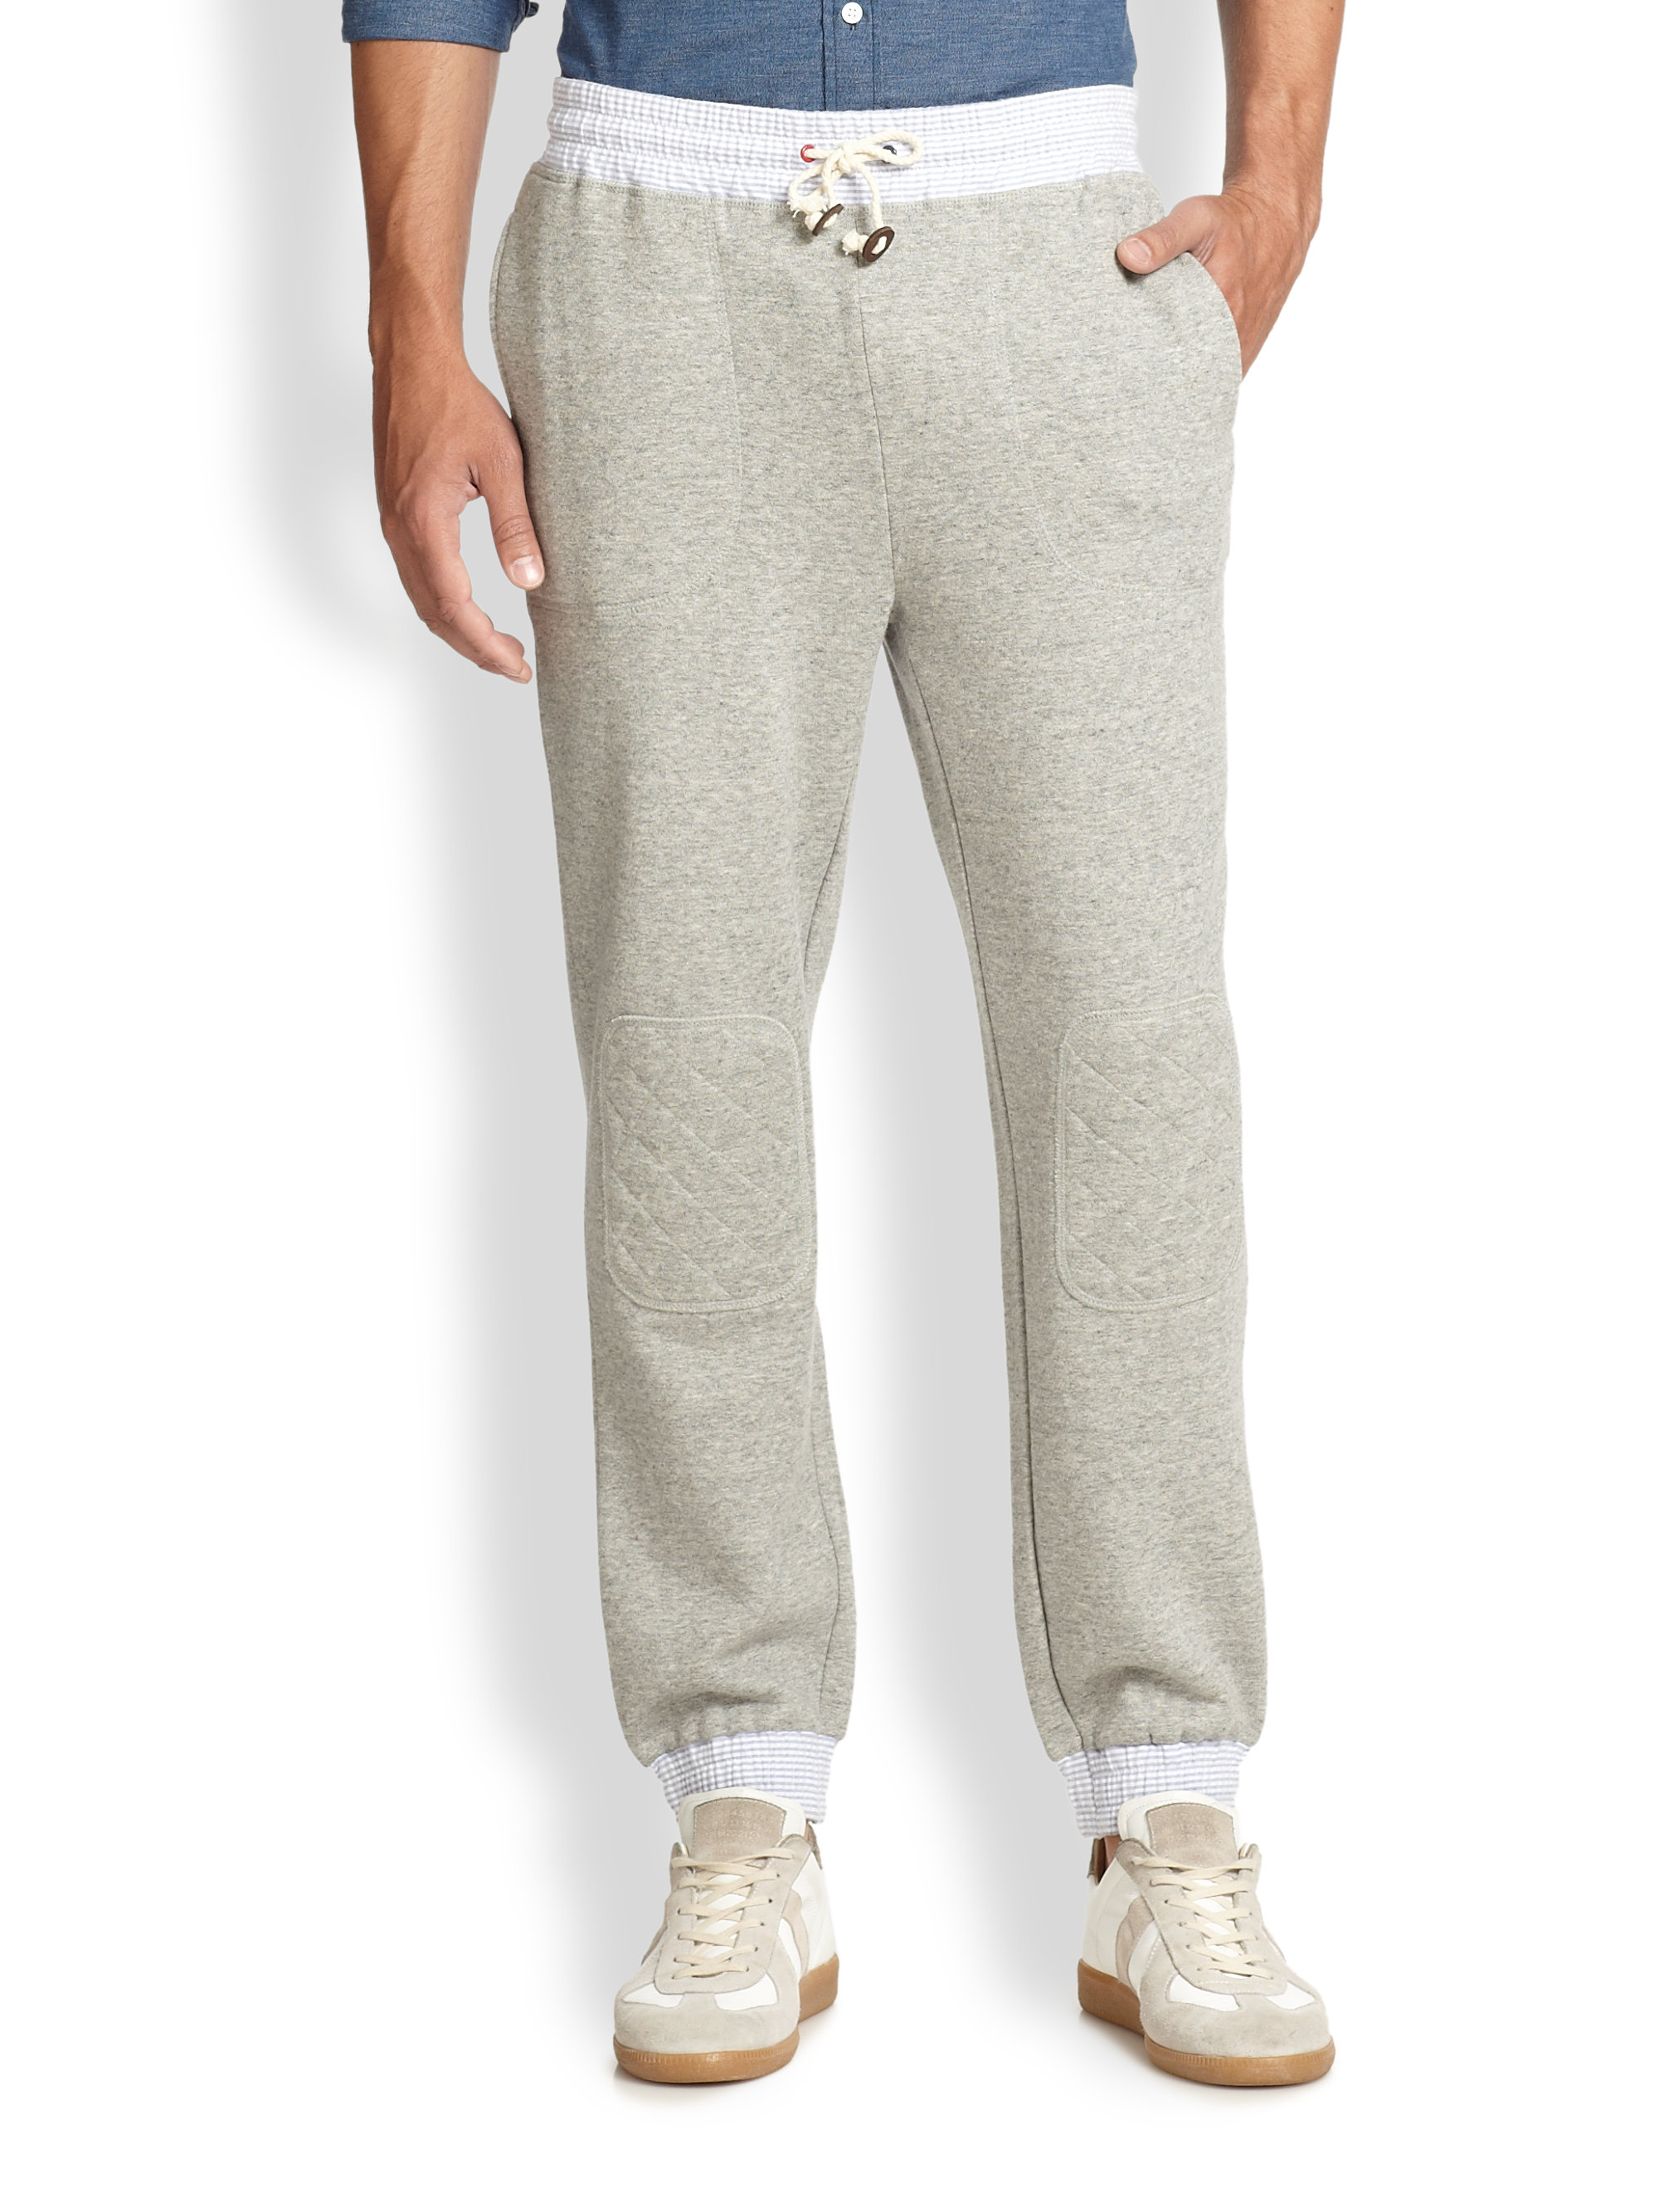 Lyst - Band Of Outsiders Quilted Patch Sweatpants in Gray for Men